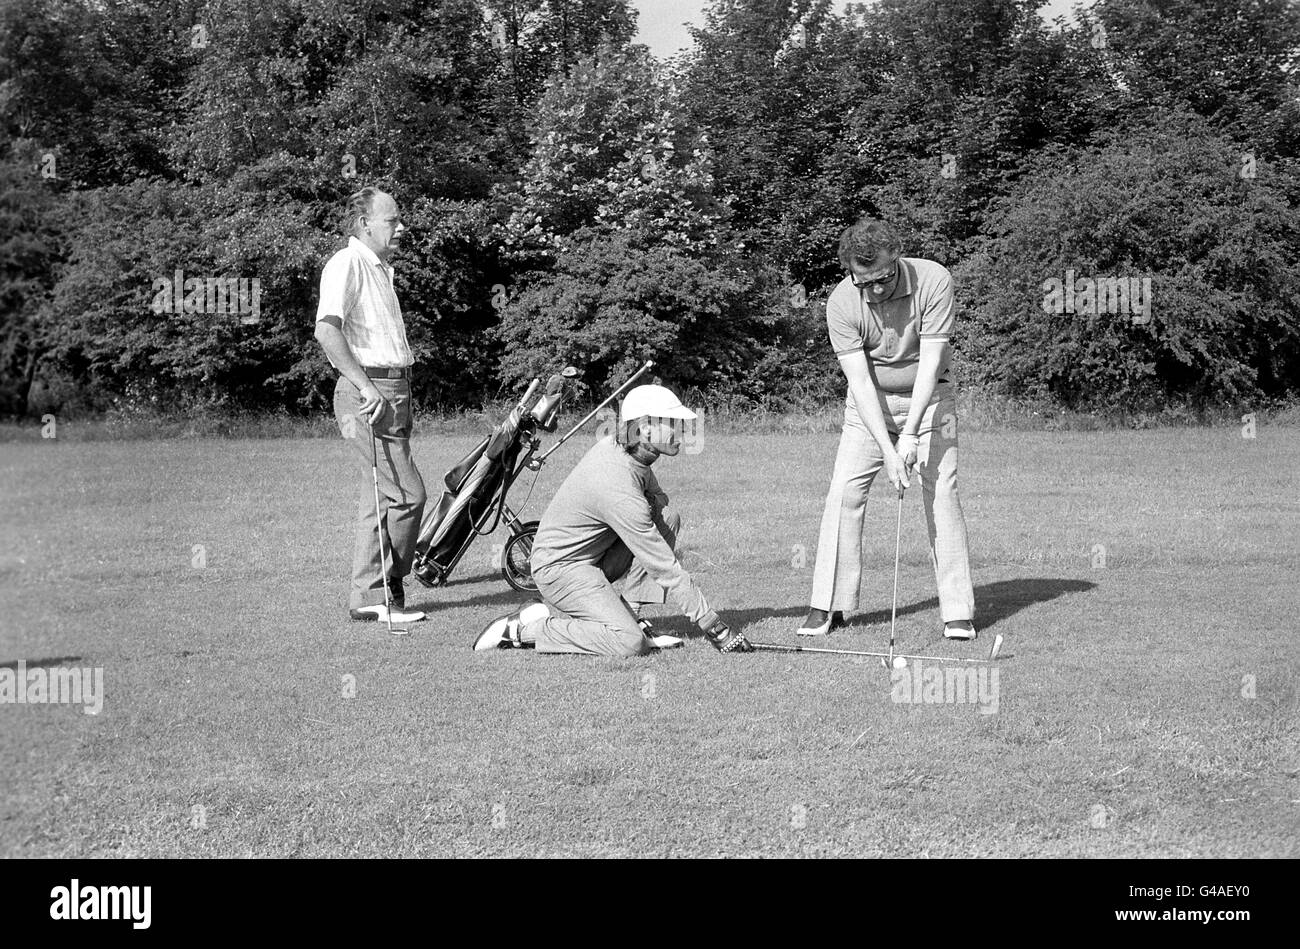 Caddy John Thornberry helps blind golfer Gerry Brereton line up for a chip shot on the course Stock Photo